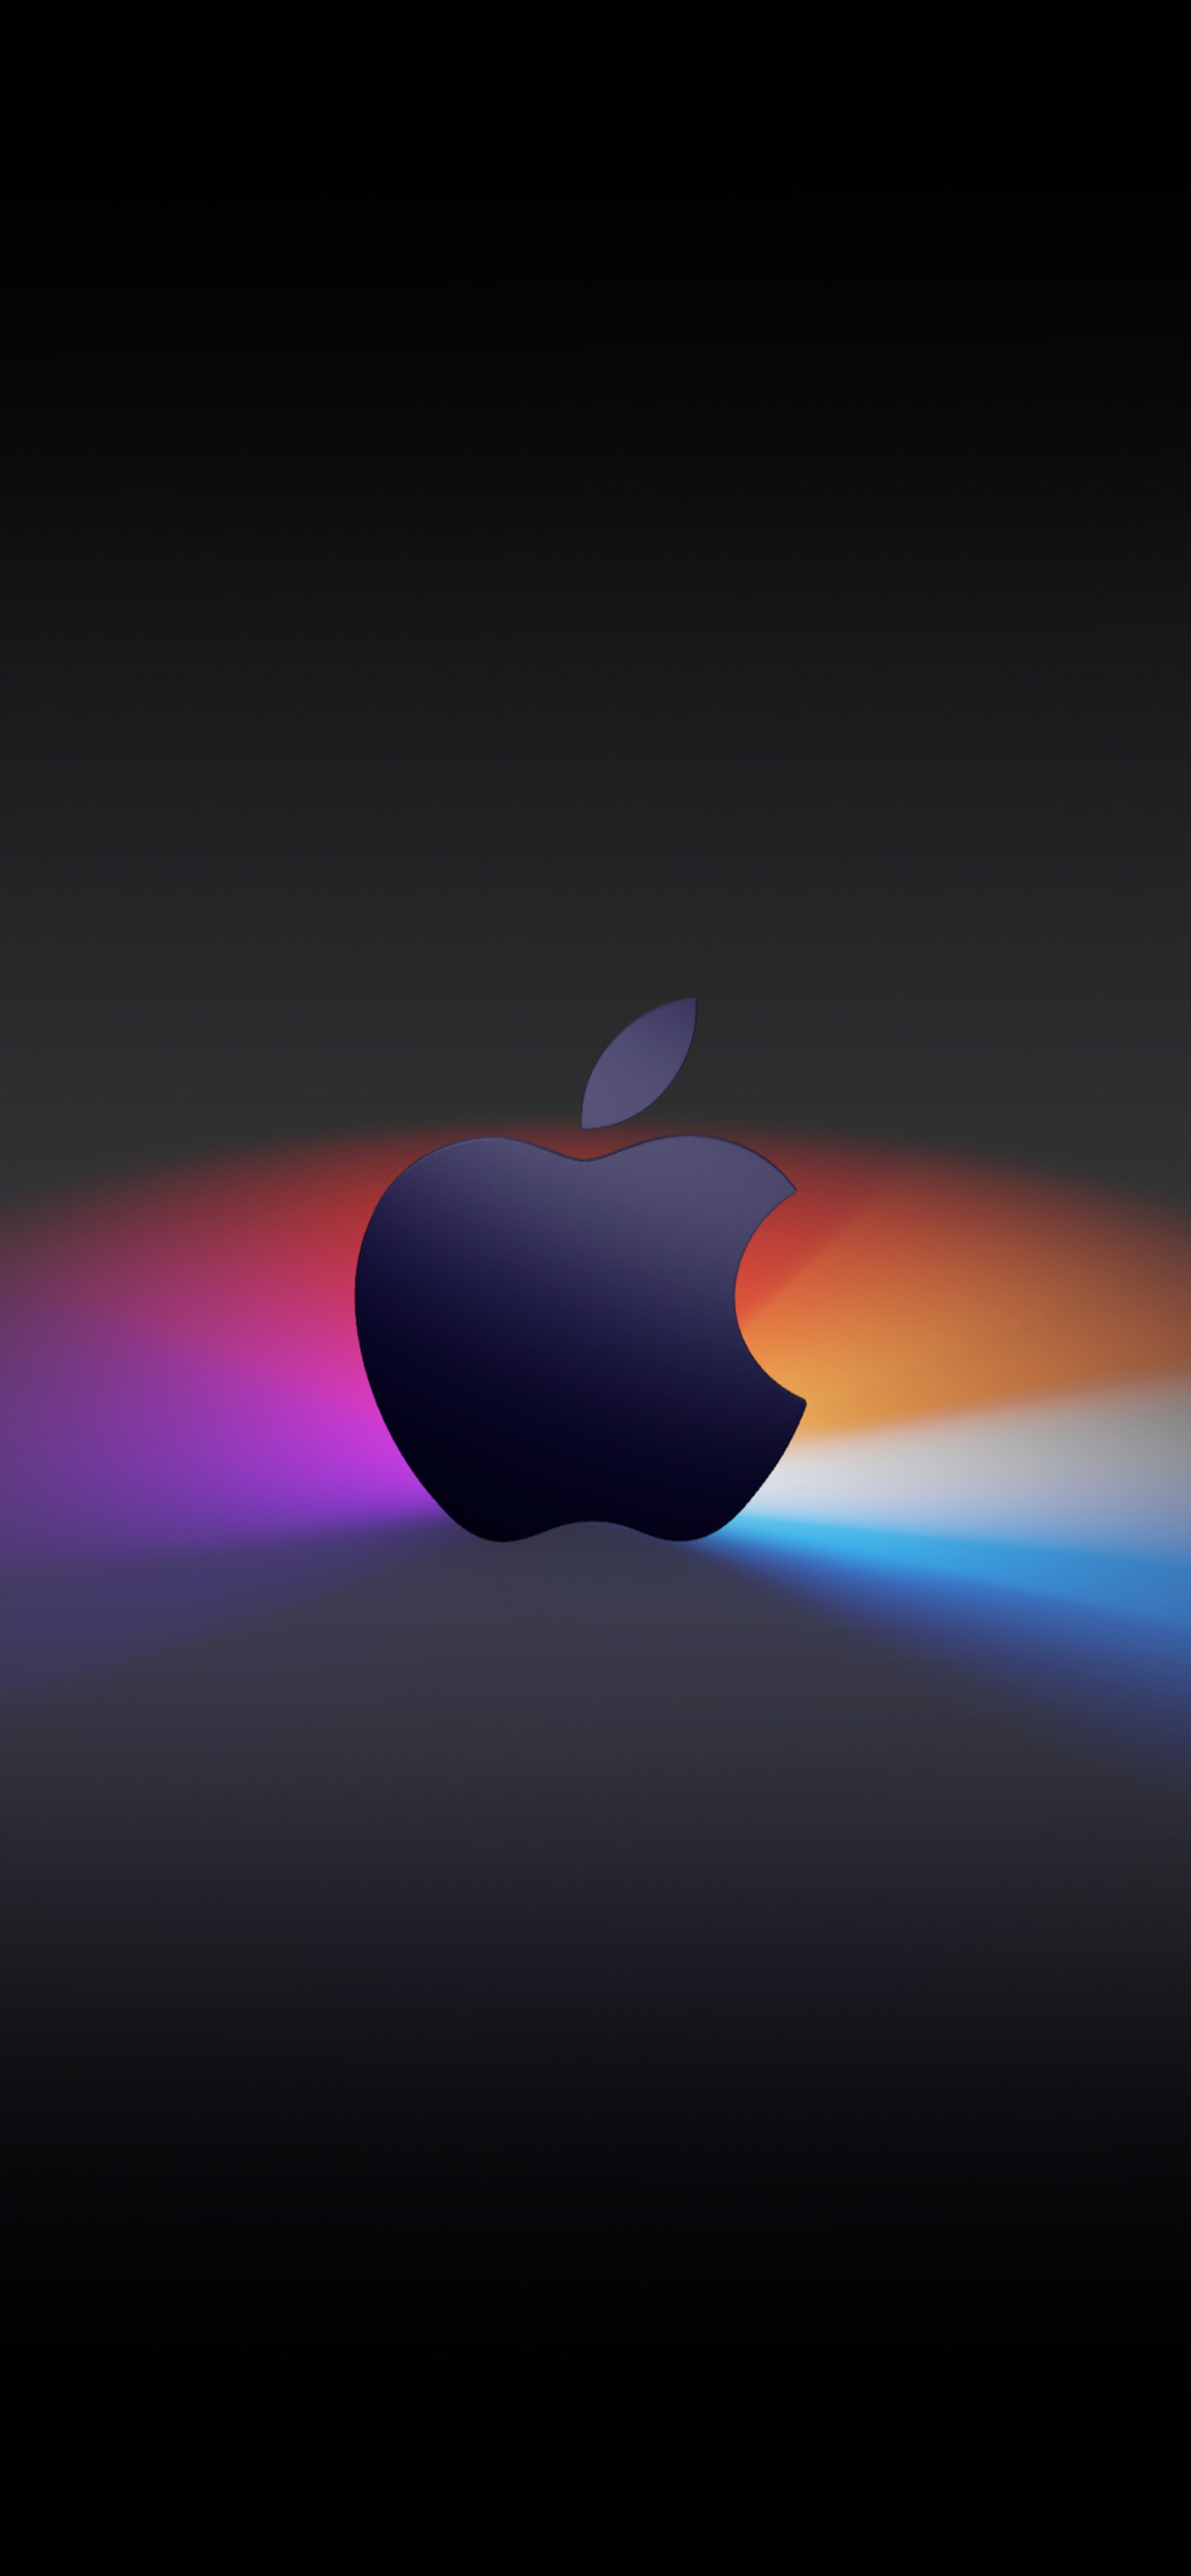 Apple One More Thing Event Wallpaper Now. Apple wallpaper iphone, Apple iphone wallpaper hd, Apple logo wallpaper iphone